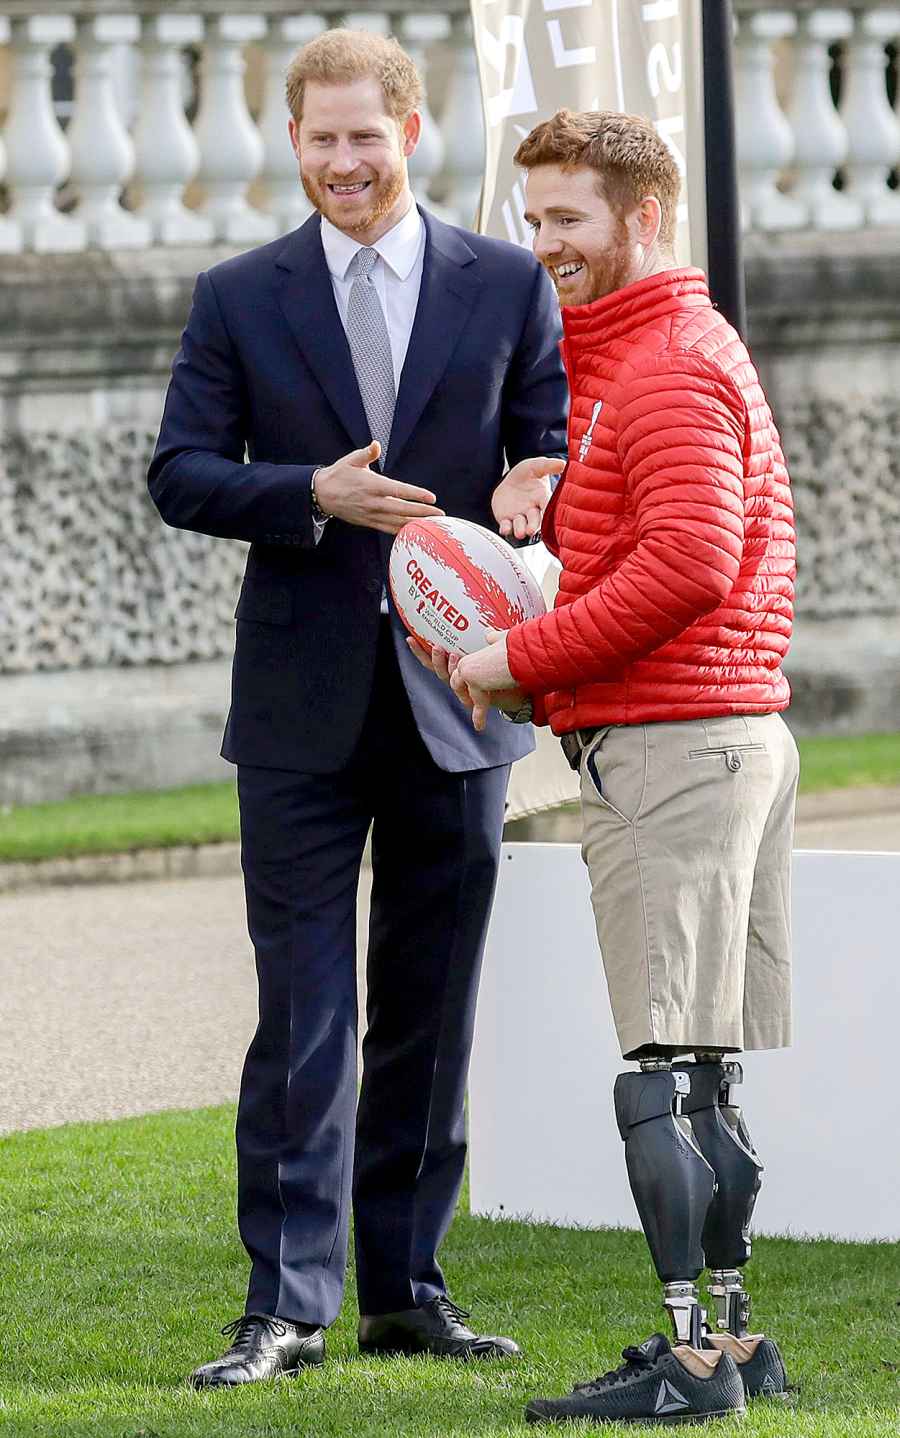 Prince-Harry-Laughs-Off-Question-About-His-Future-as-a-Royal-at-1st-Public-Appearance-Since-Stepping-Down-1